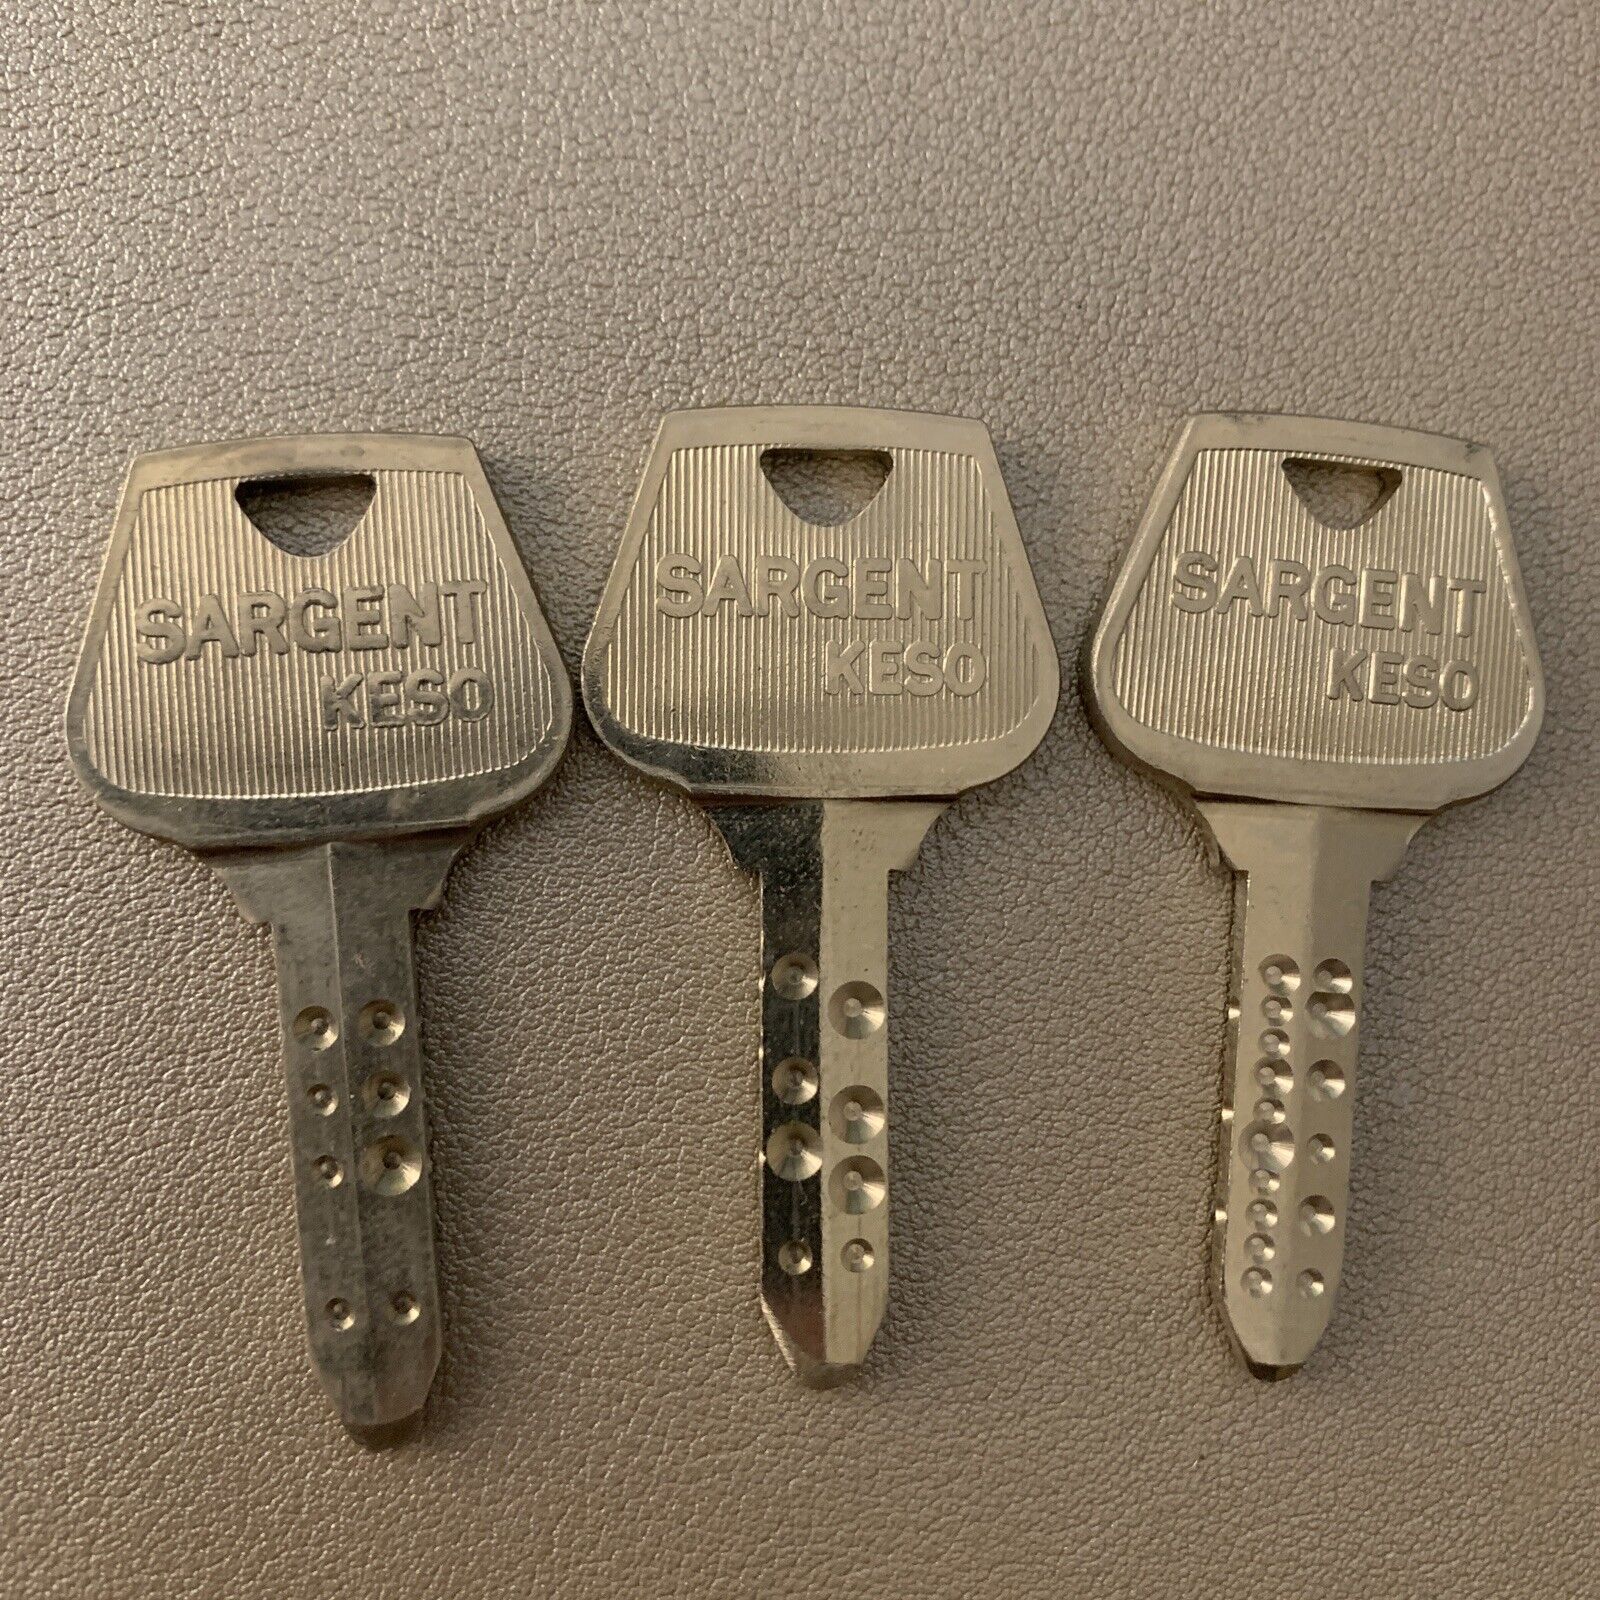 Sargent Keso Dimple Key Lots Of 3. Each Lot Will Include A Master Style Key